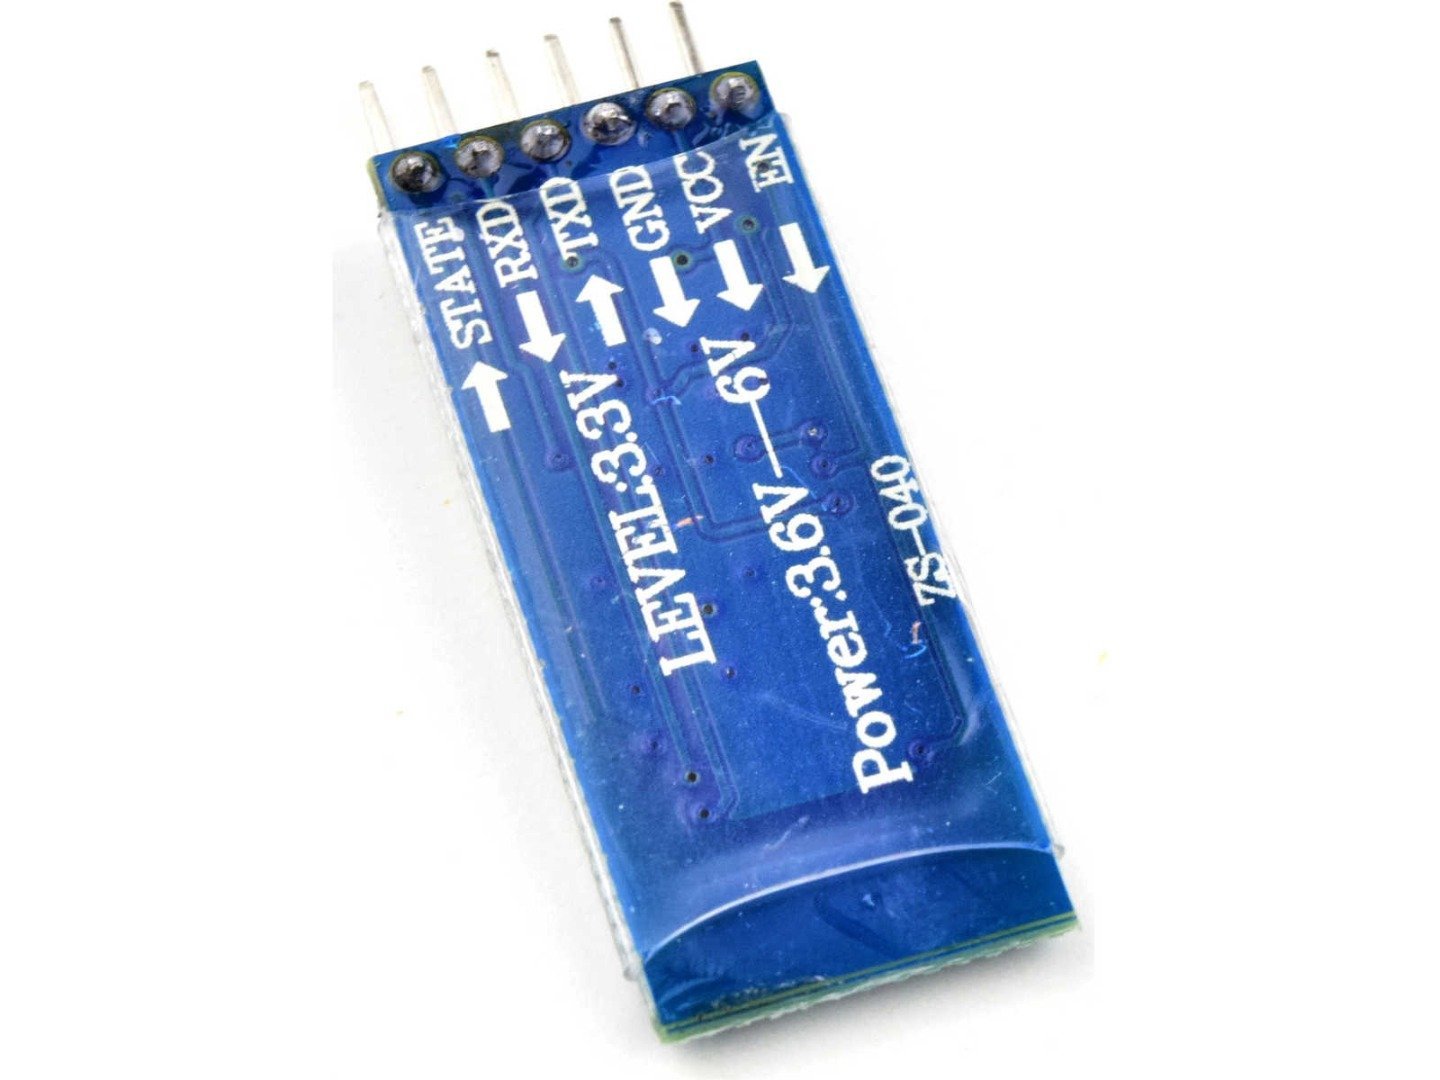 HM-10 Bluetooth 4.0 BLE Module with TI CC2541 chipset 5